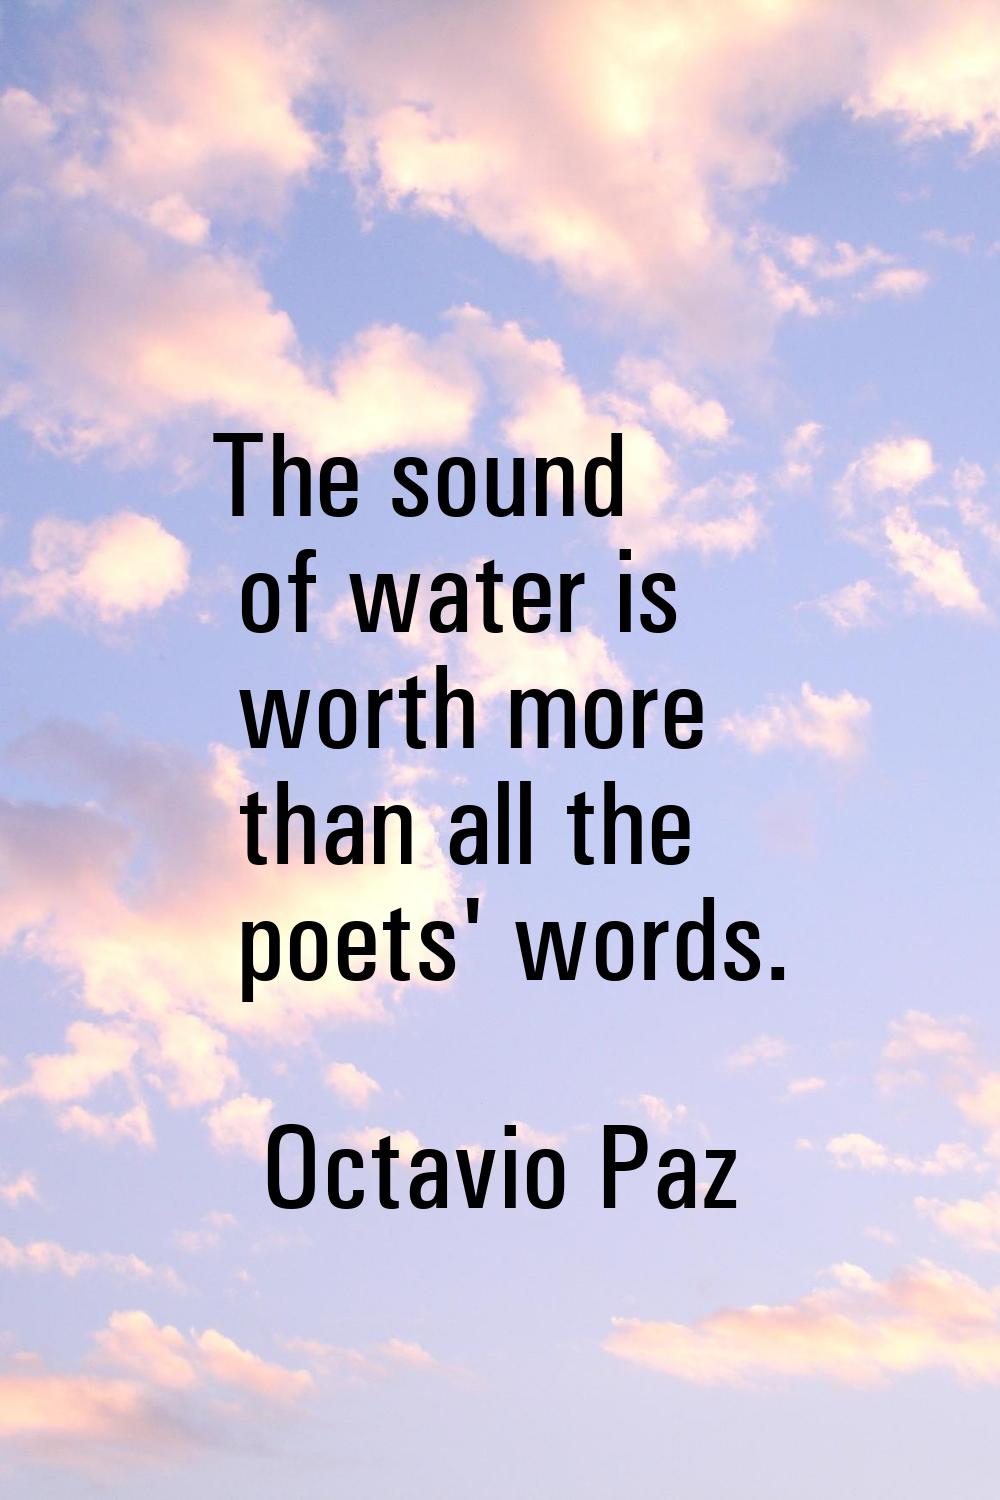 The sound of water is worth more than all the poets' words.